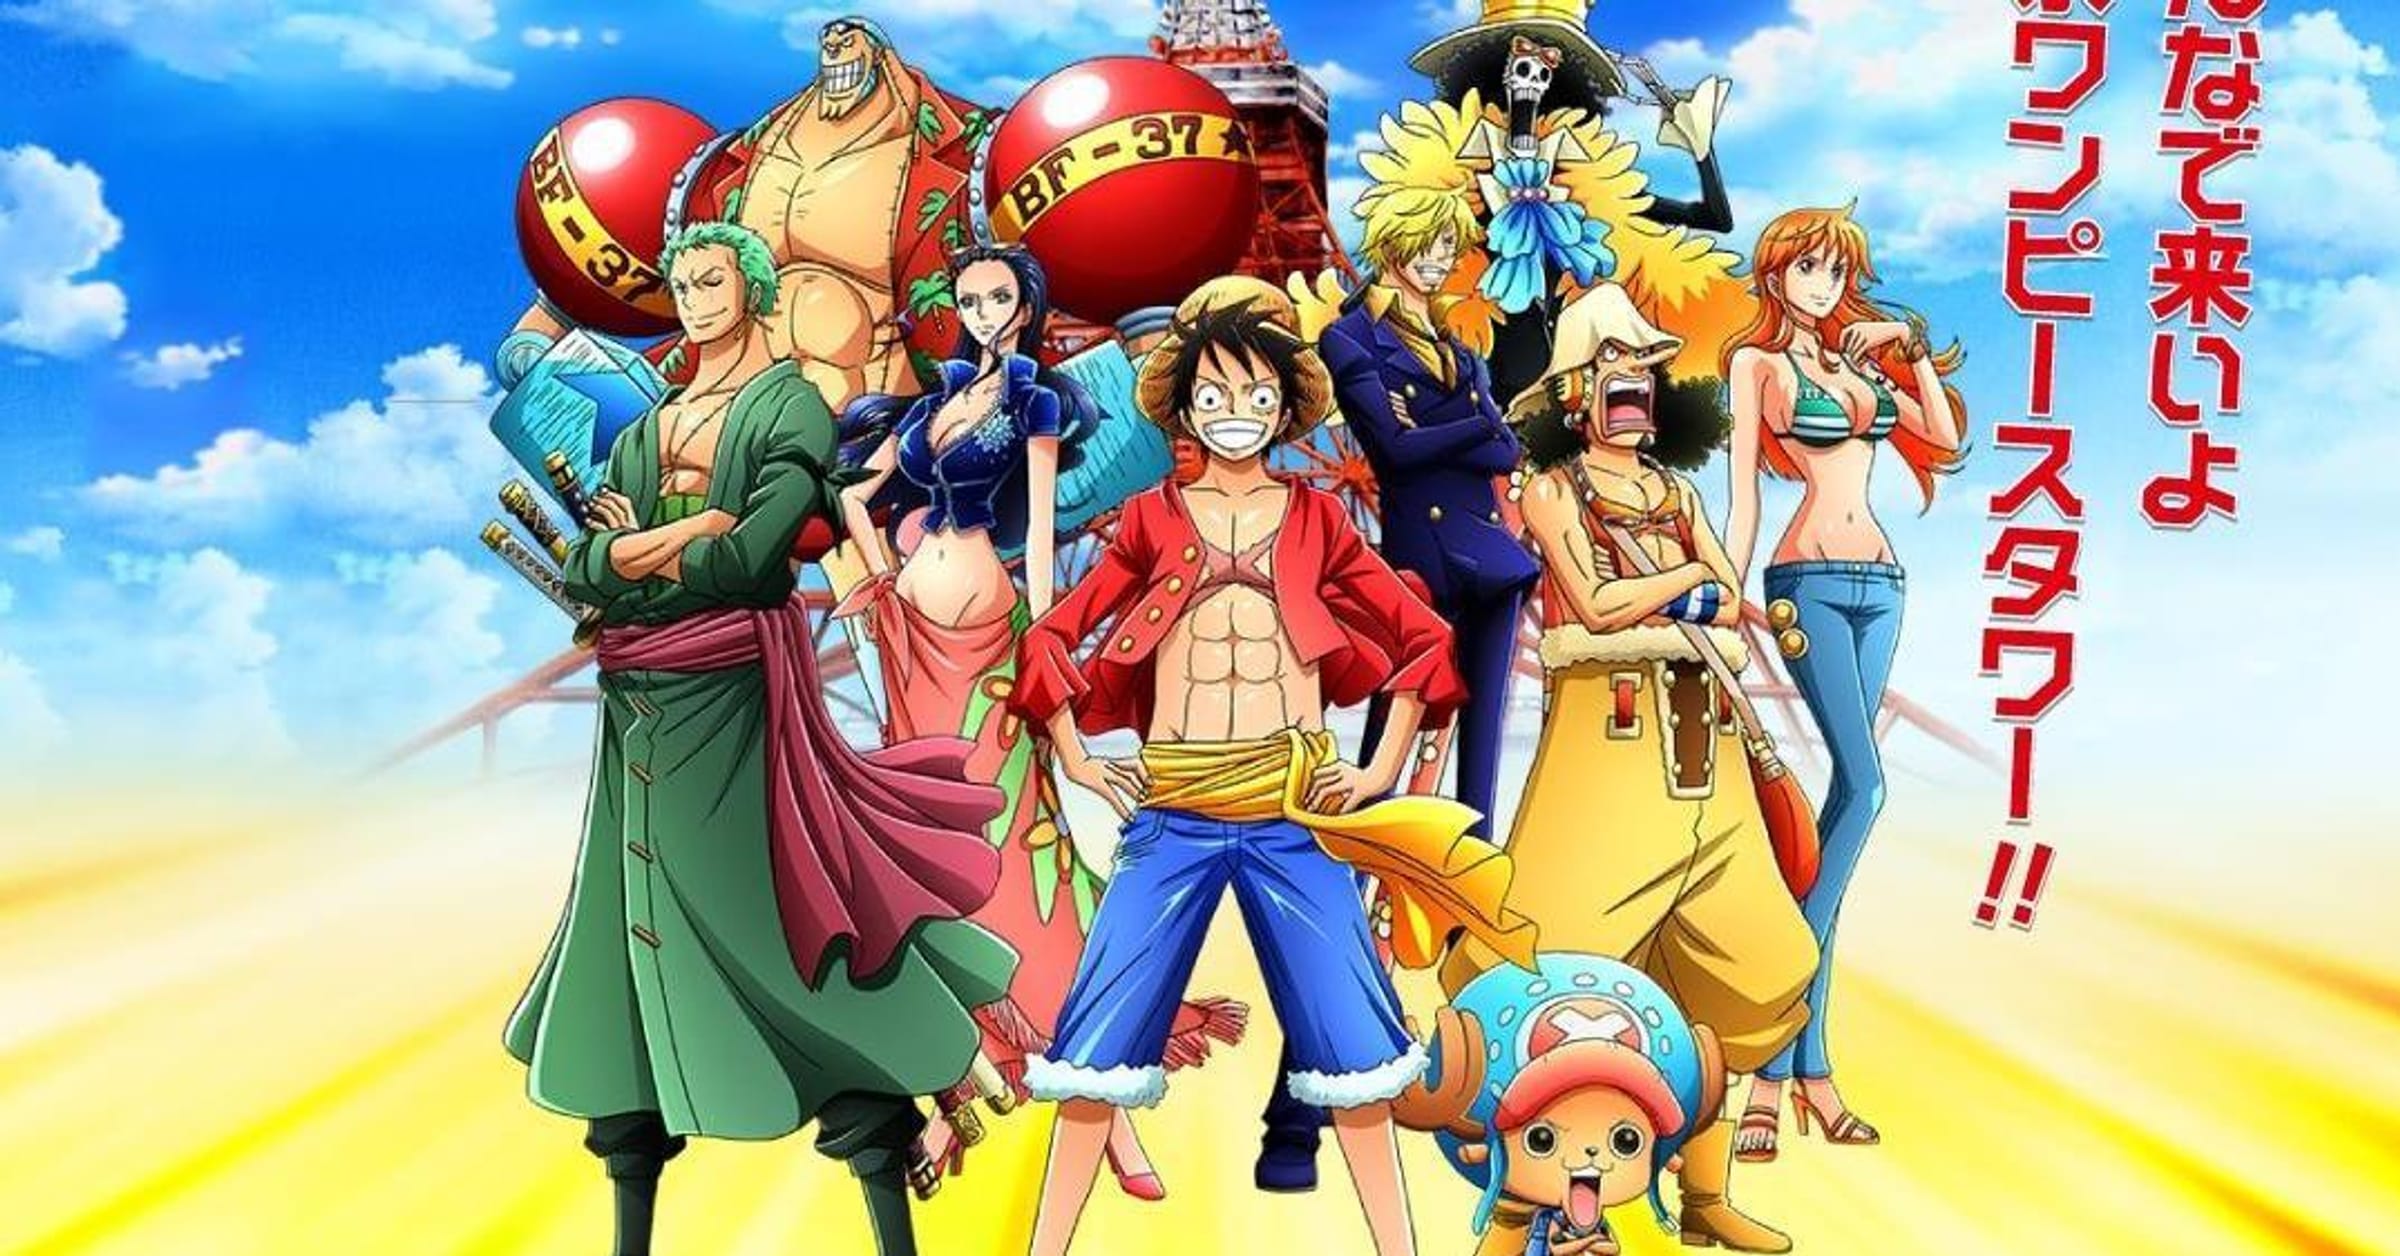 One Piece Openings Ranked: A Journey through the Pirate Anthems